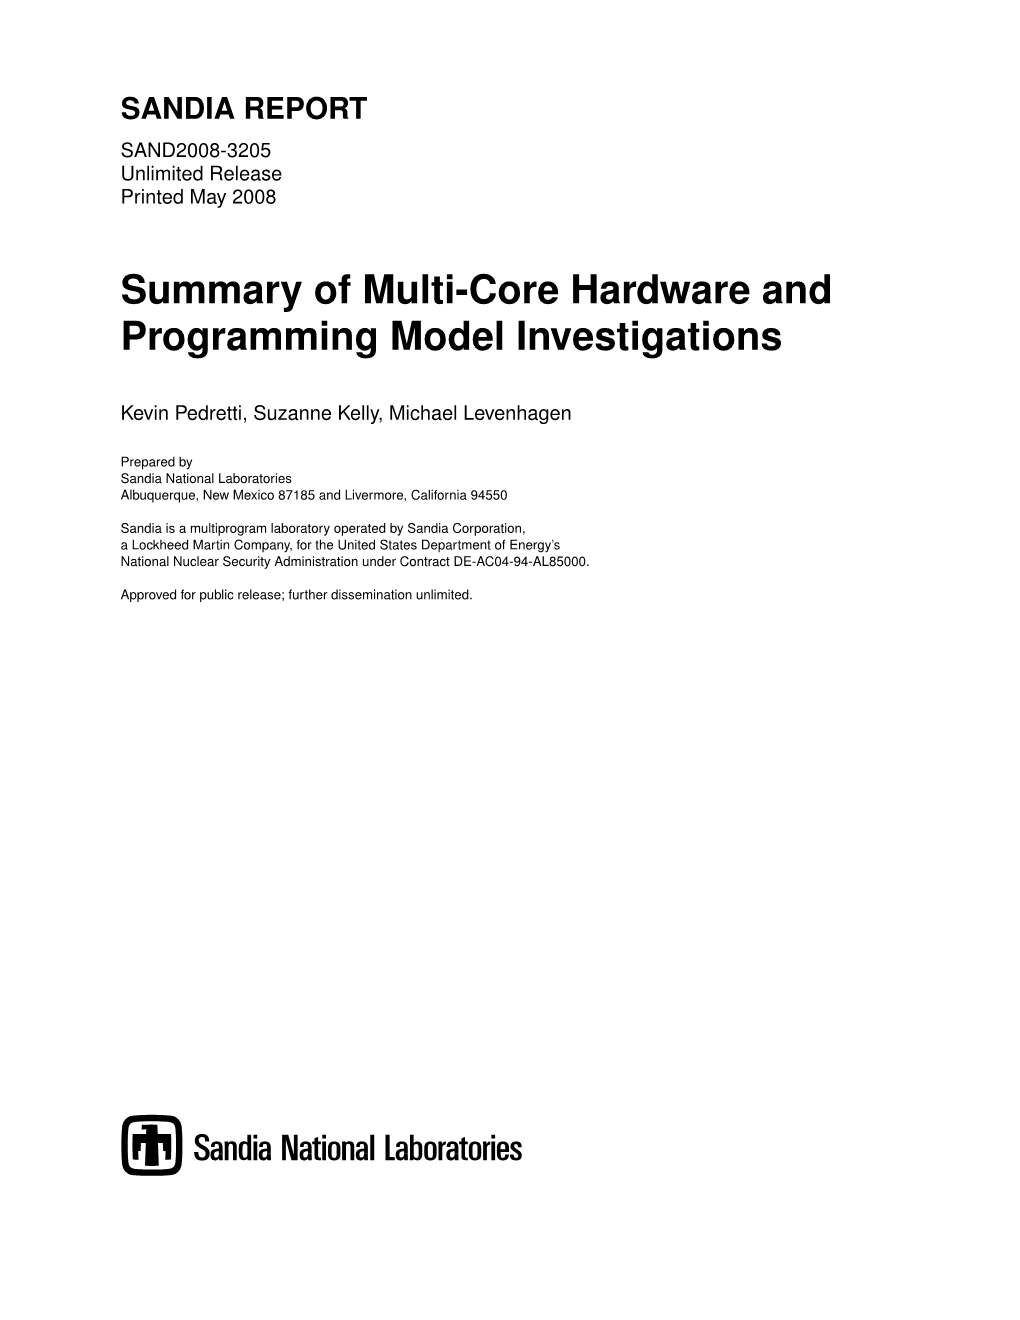 Summary of Multi-Core Hardware and Programming Model Investigations